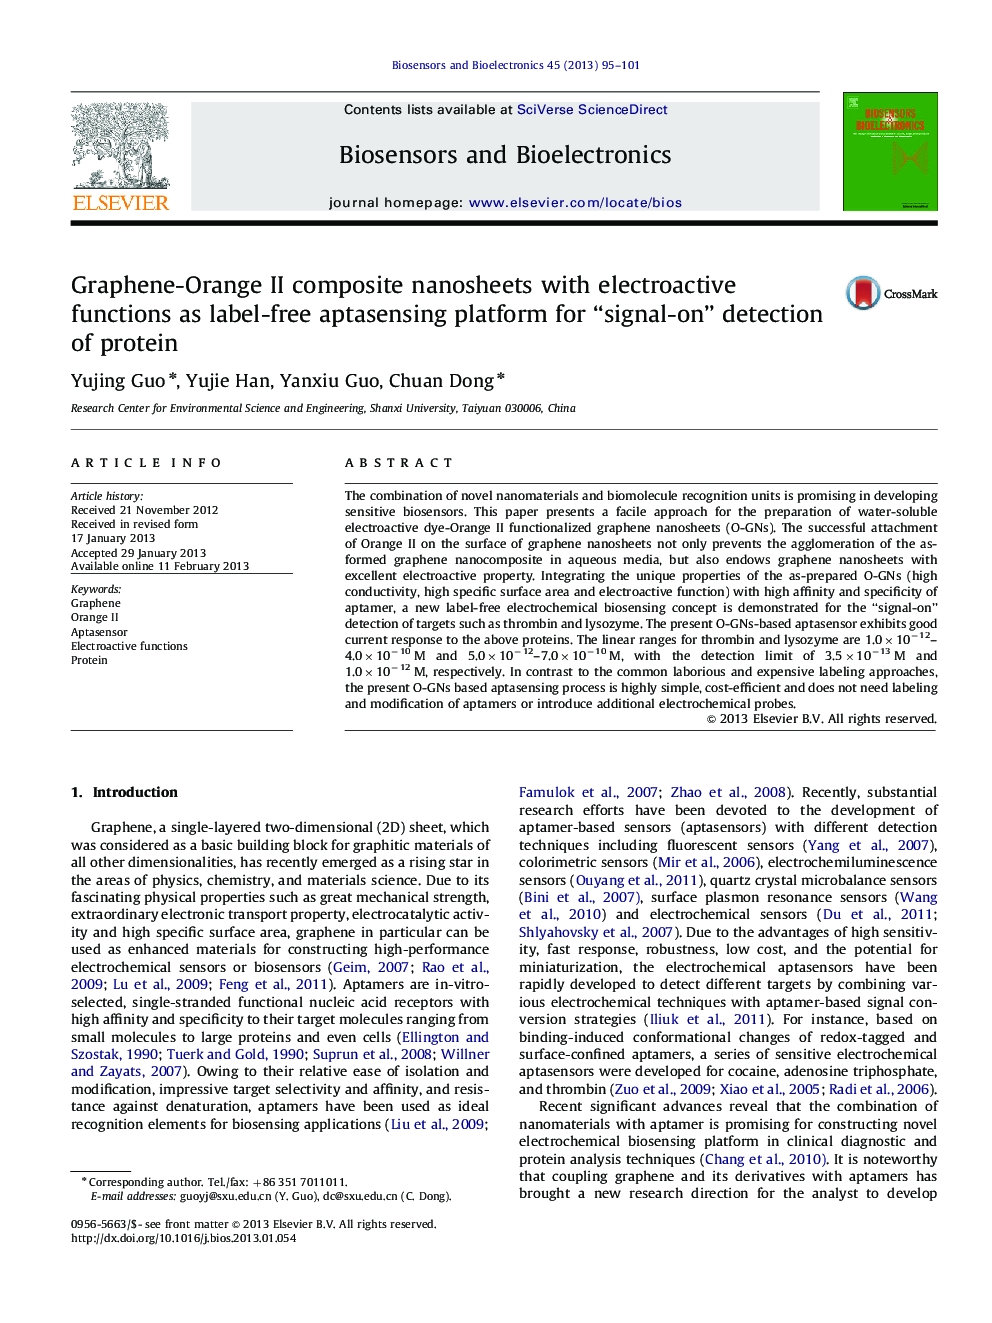 Graphene-Orange II composite nanosheets with electroactive functions as label-free aptasensing platform for “signal-on” detection of protein